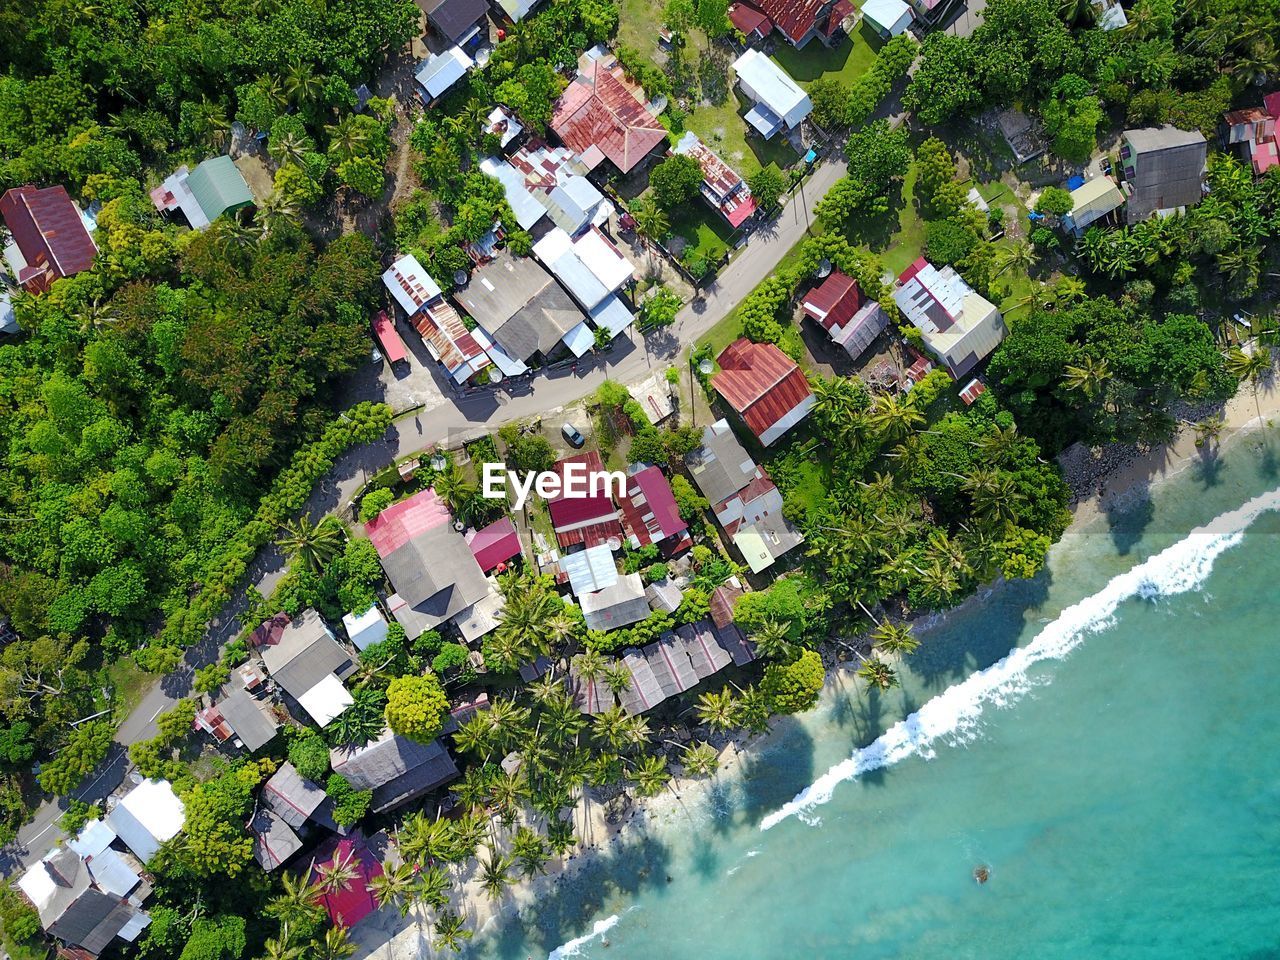 Natural view of coconut trees, beaches and city building from an altitude angle of 100 meters